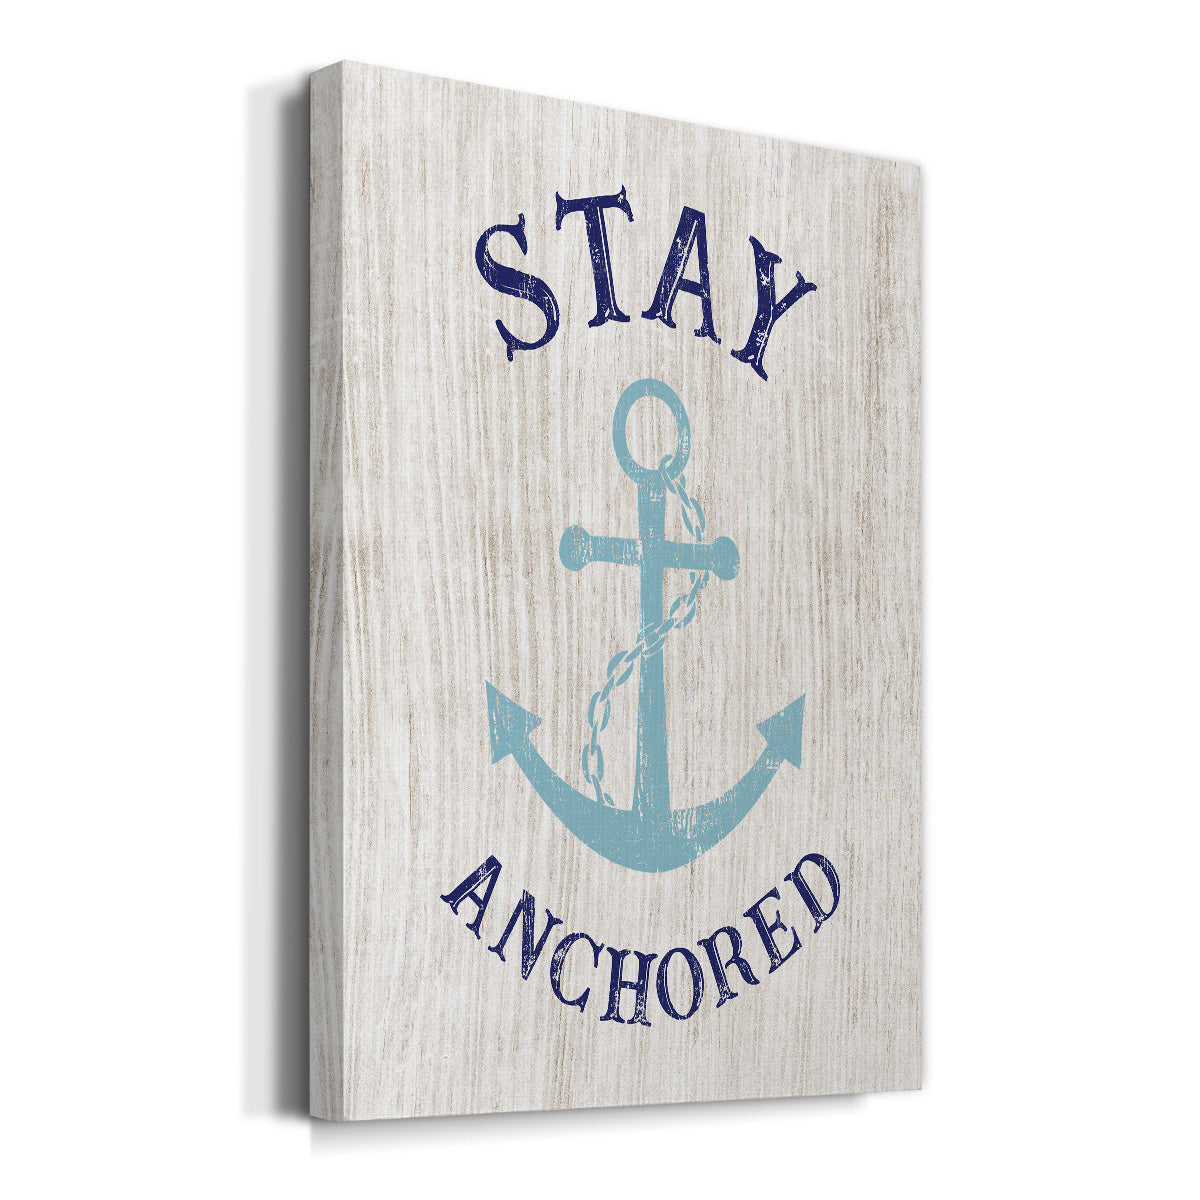 Stay Anchored Premium Gallery Wrapped Canvas - Ready to Hang